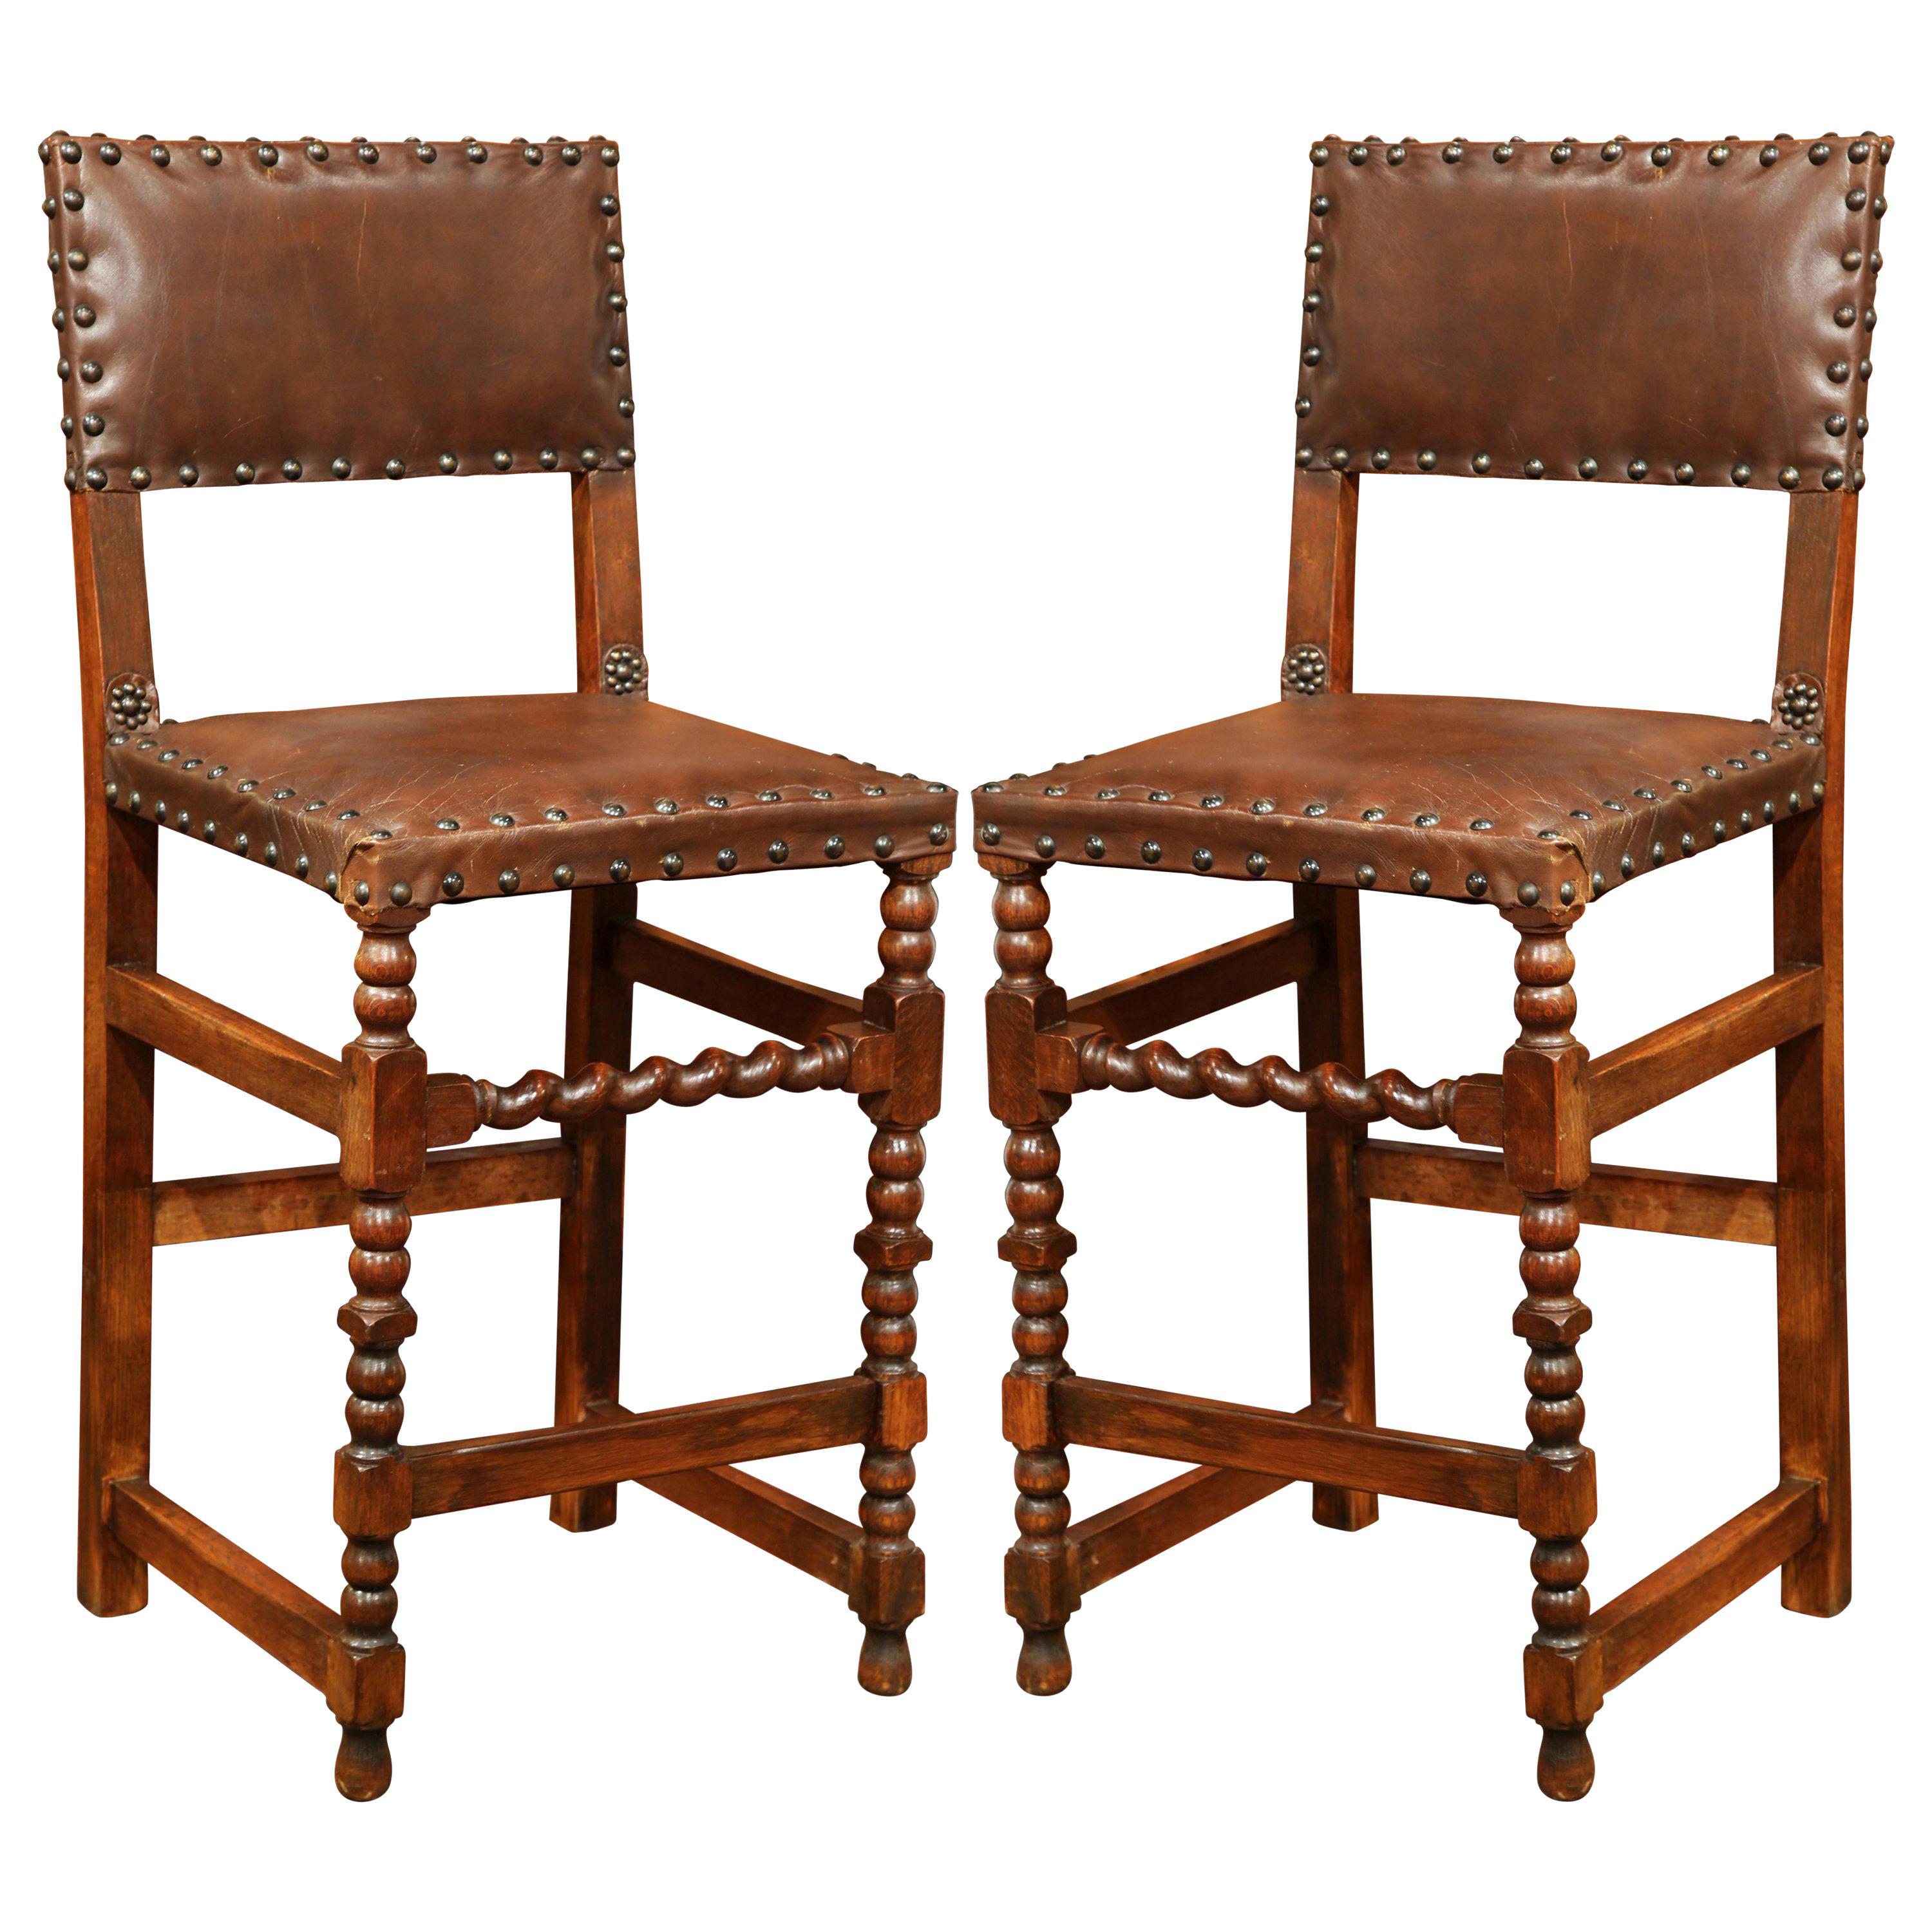 Pair of 19th Century French Carved Walnut Bar Stools with Original Brown Leather